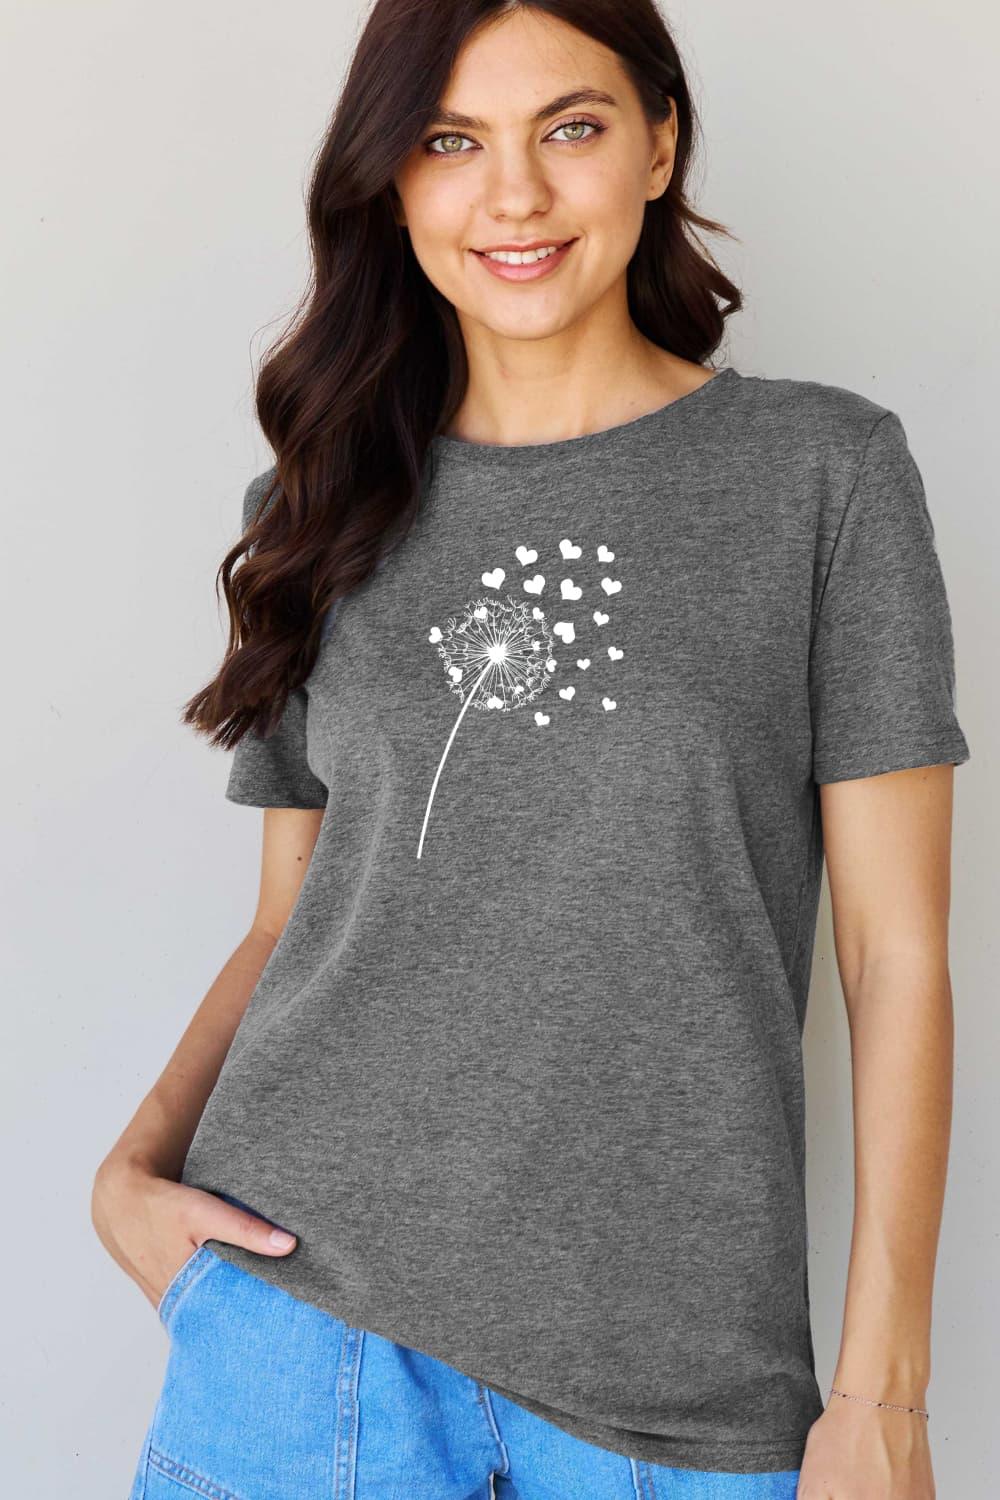 Simply Love Full Size Dandelion Heart Graphic Cotton T-Shirt - Crazy Like a Daisy Boutique